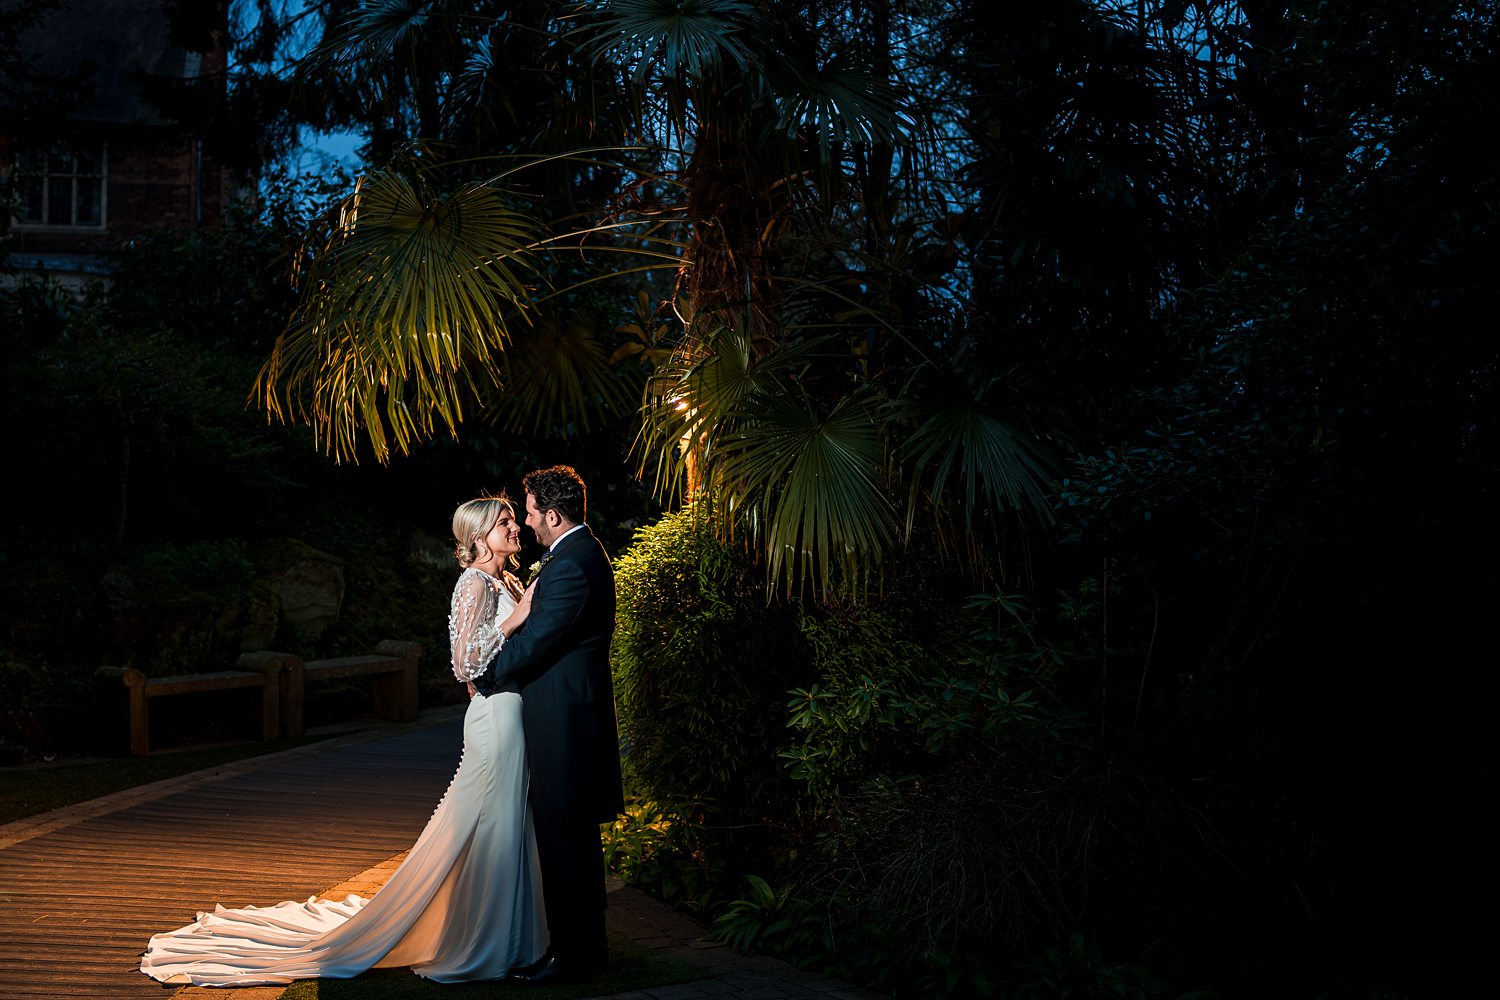 Couple kissing at night, tropical garden setting.